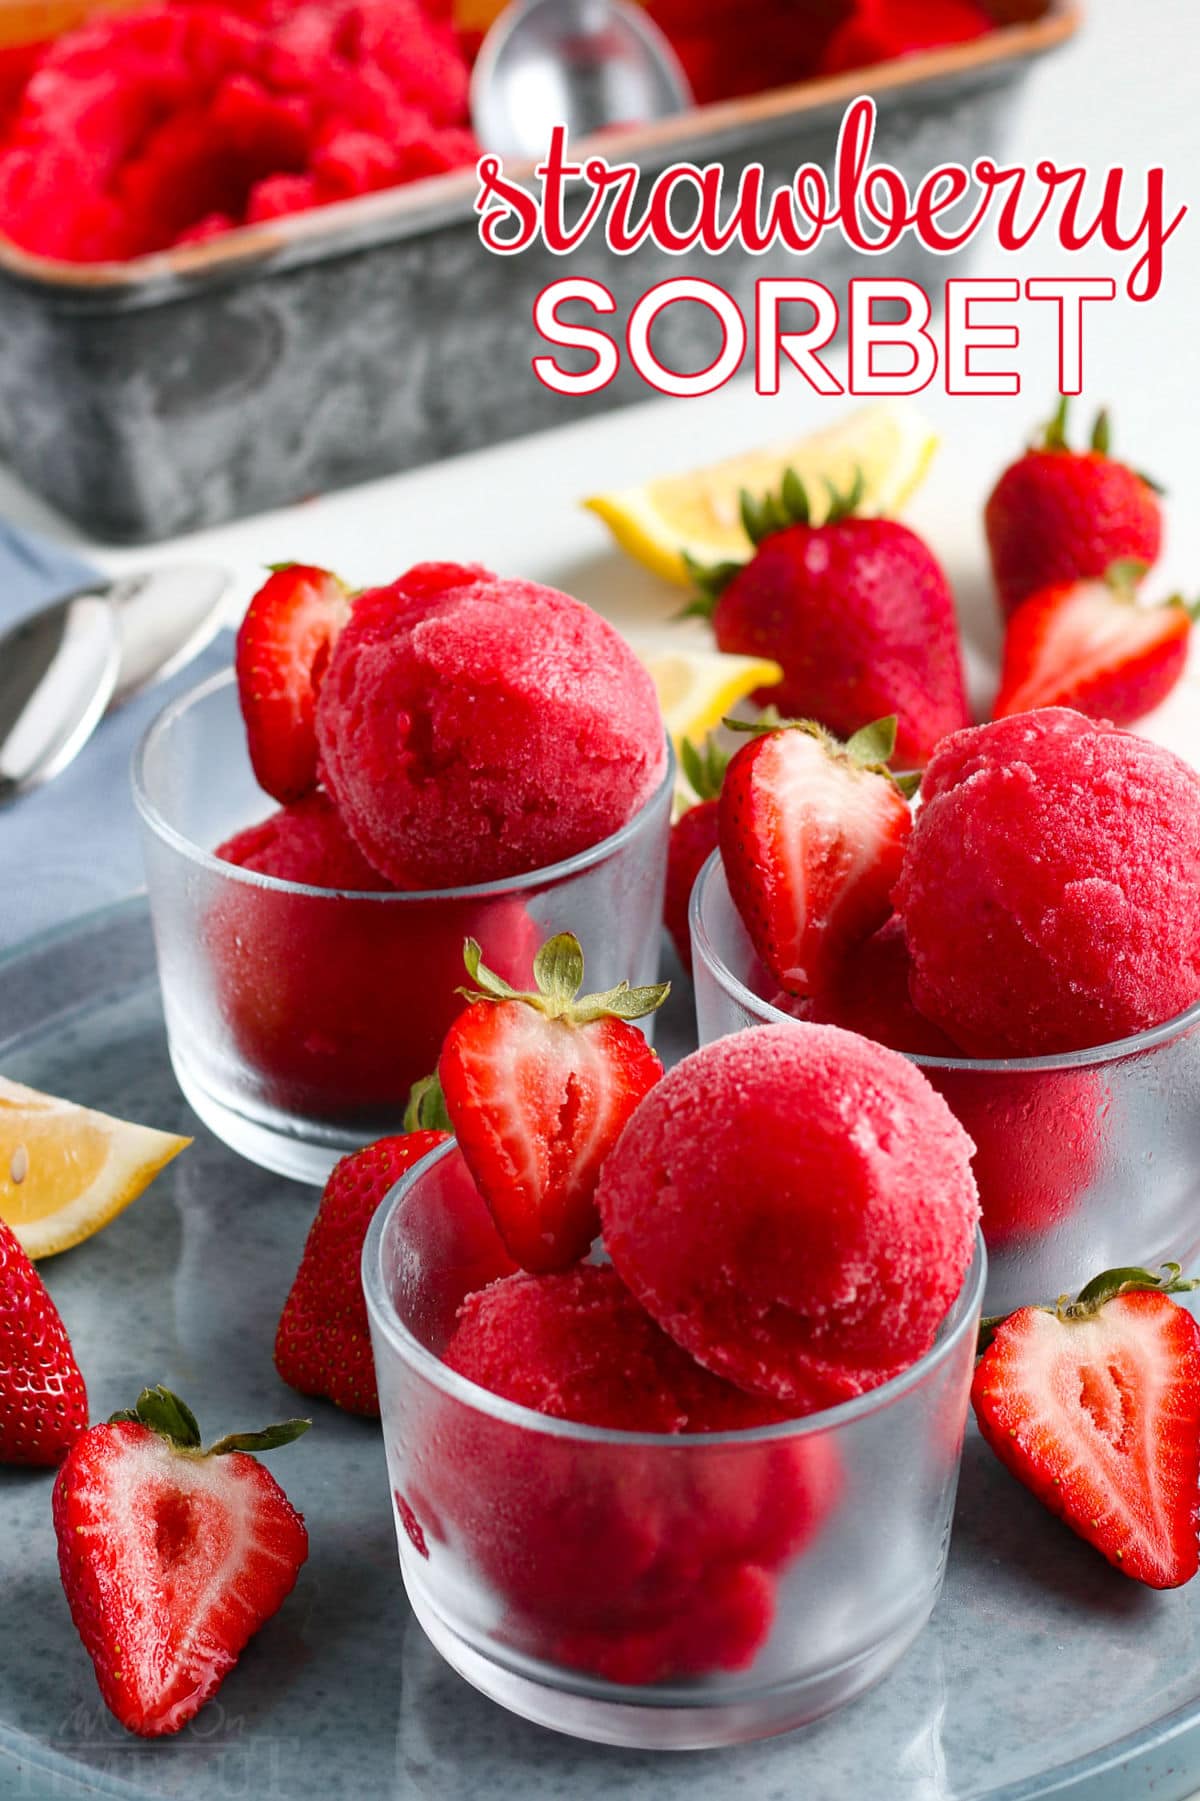 strawberry sorbet recipe on gray plate in glass jars with fresh strawberry slices and text overlay